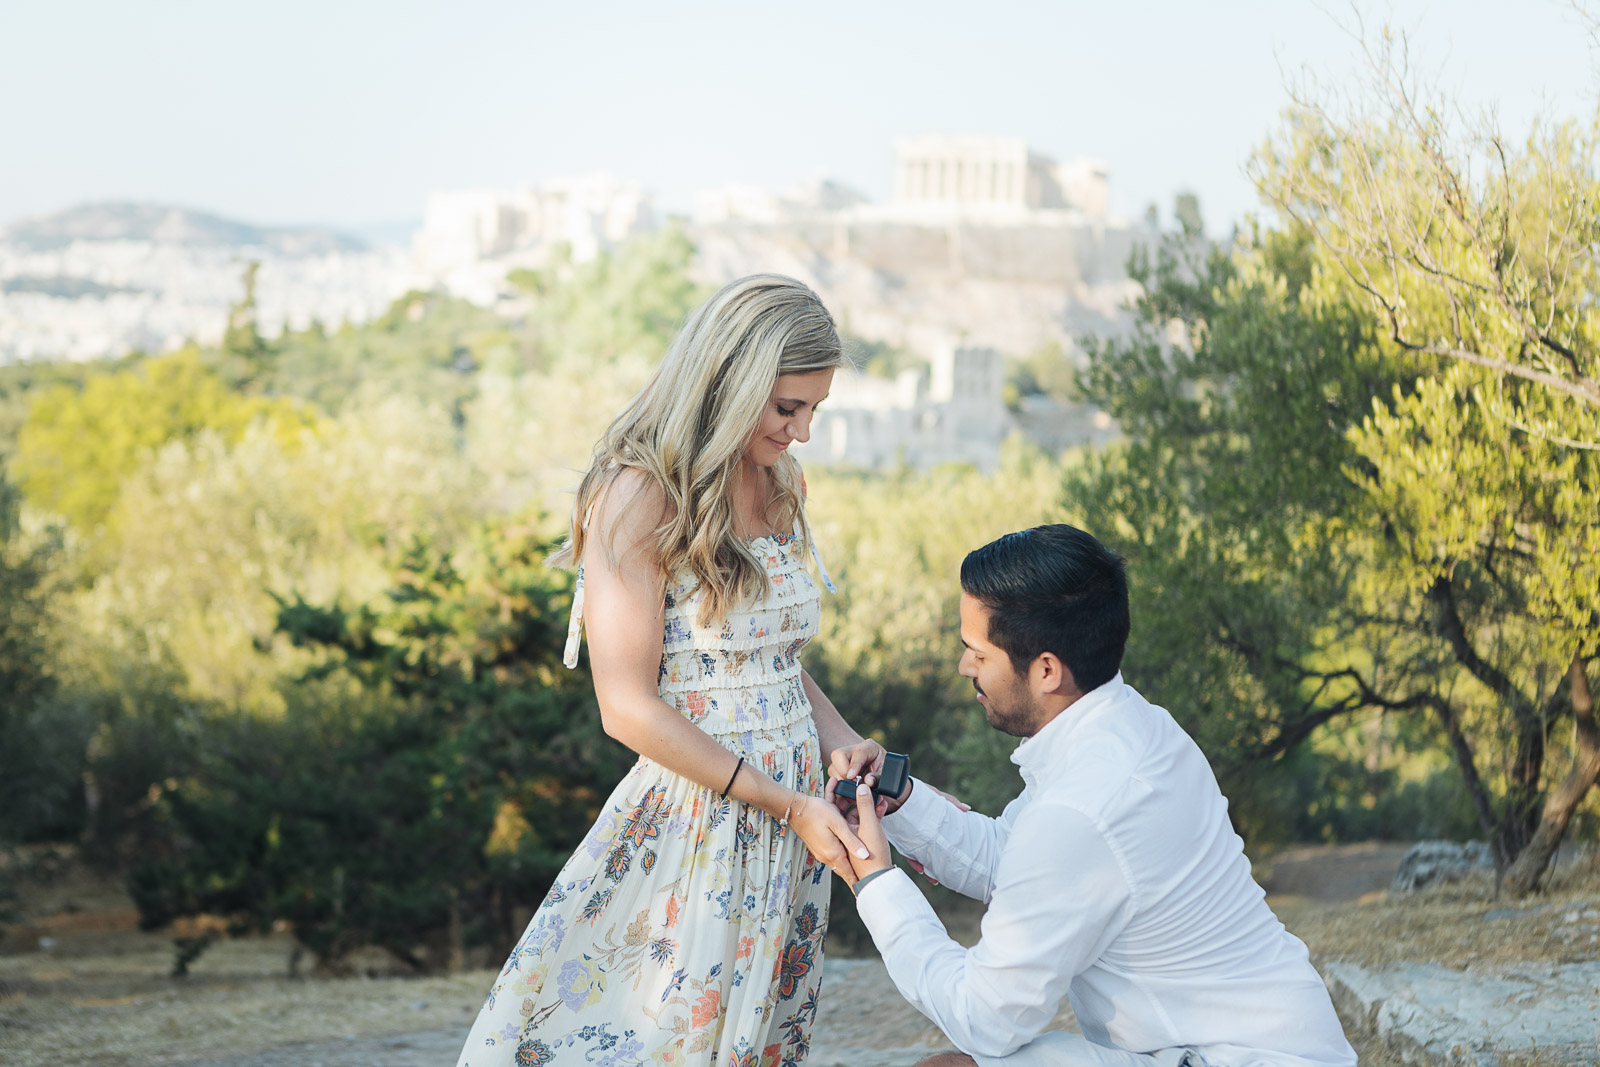 Marriage proposal photo session in Athens